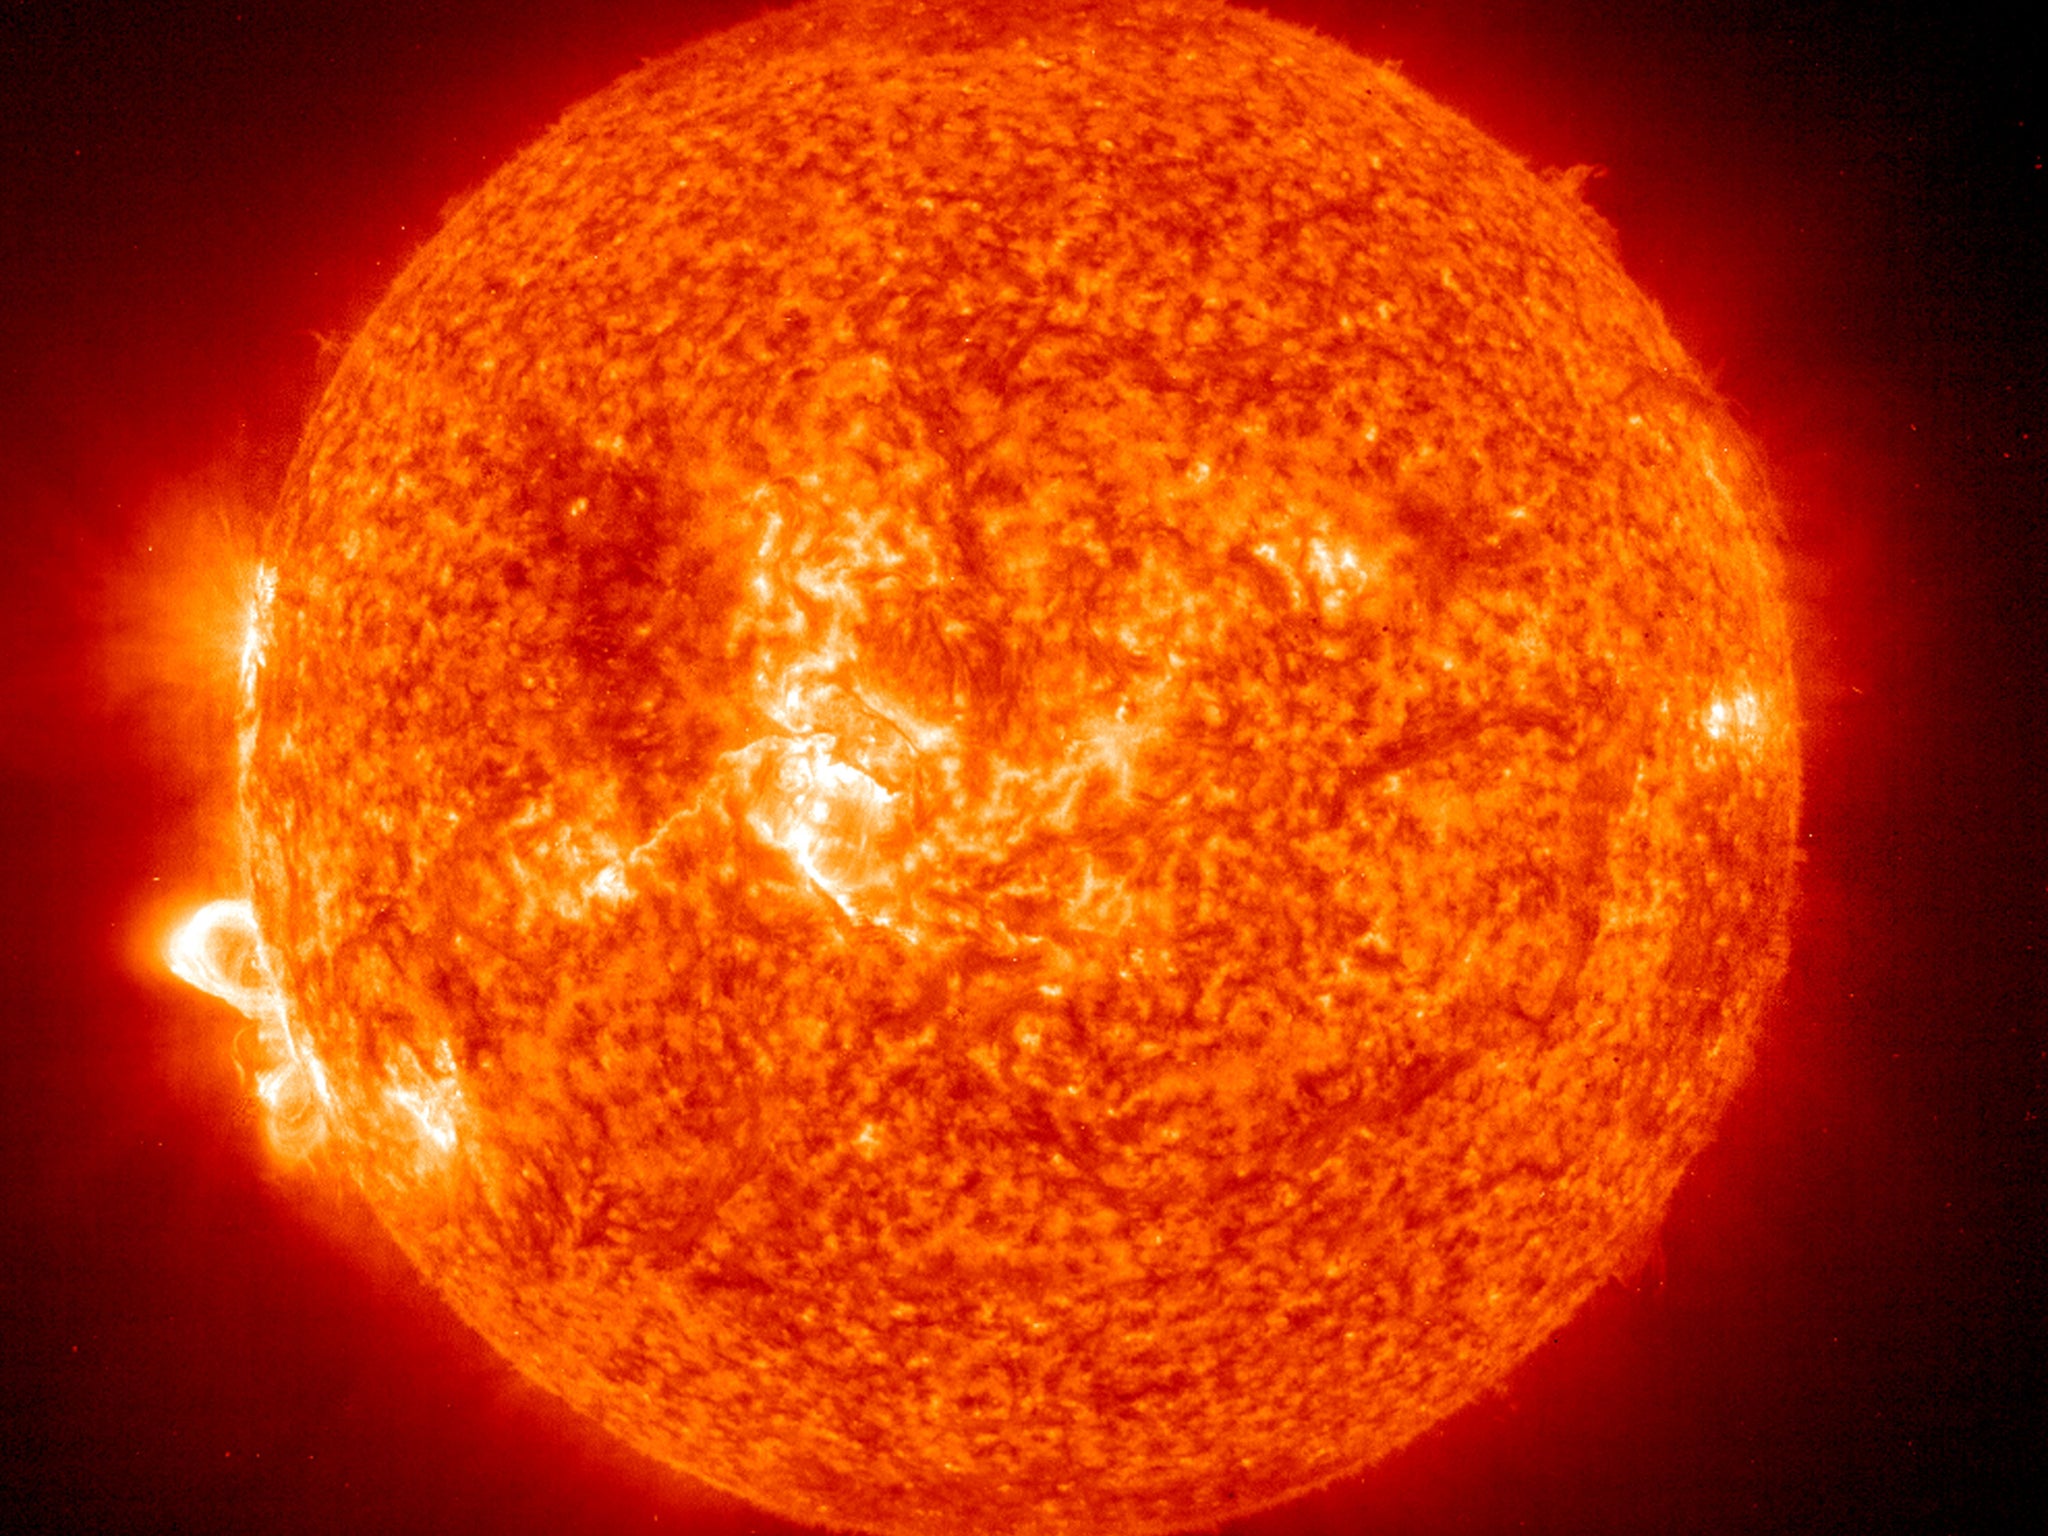 A Solar and Heliospheric Observatory image shows Region 486 that unleashed a record flare on November 18, 2003 on the sun. The spot itself cannot yet be seen but large, hot, gas-filled loops above this region are visible